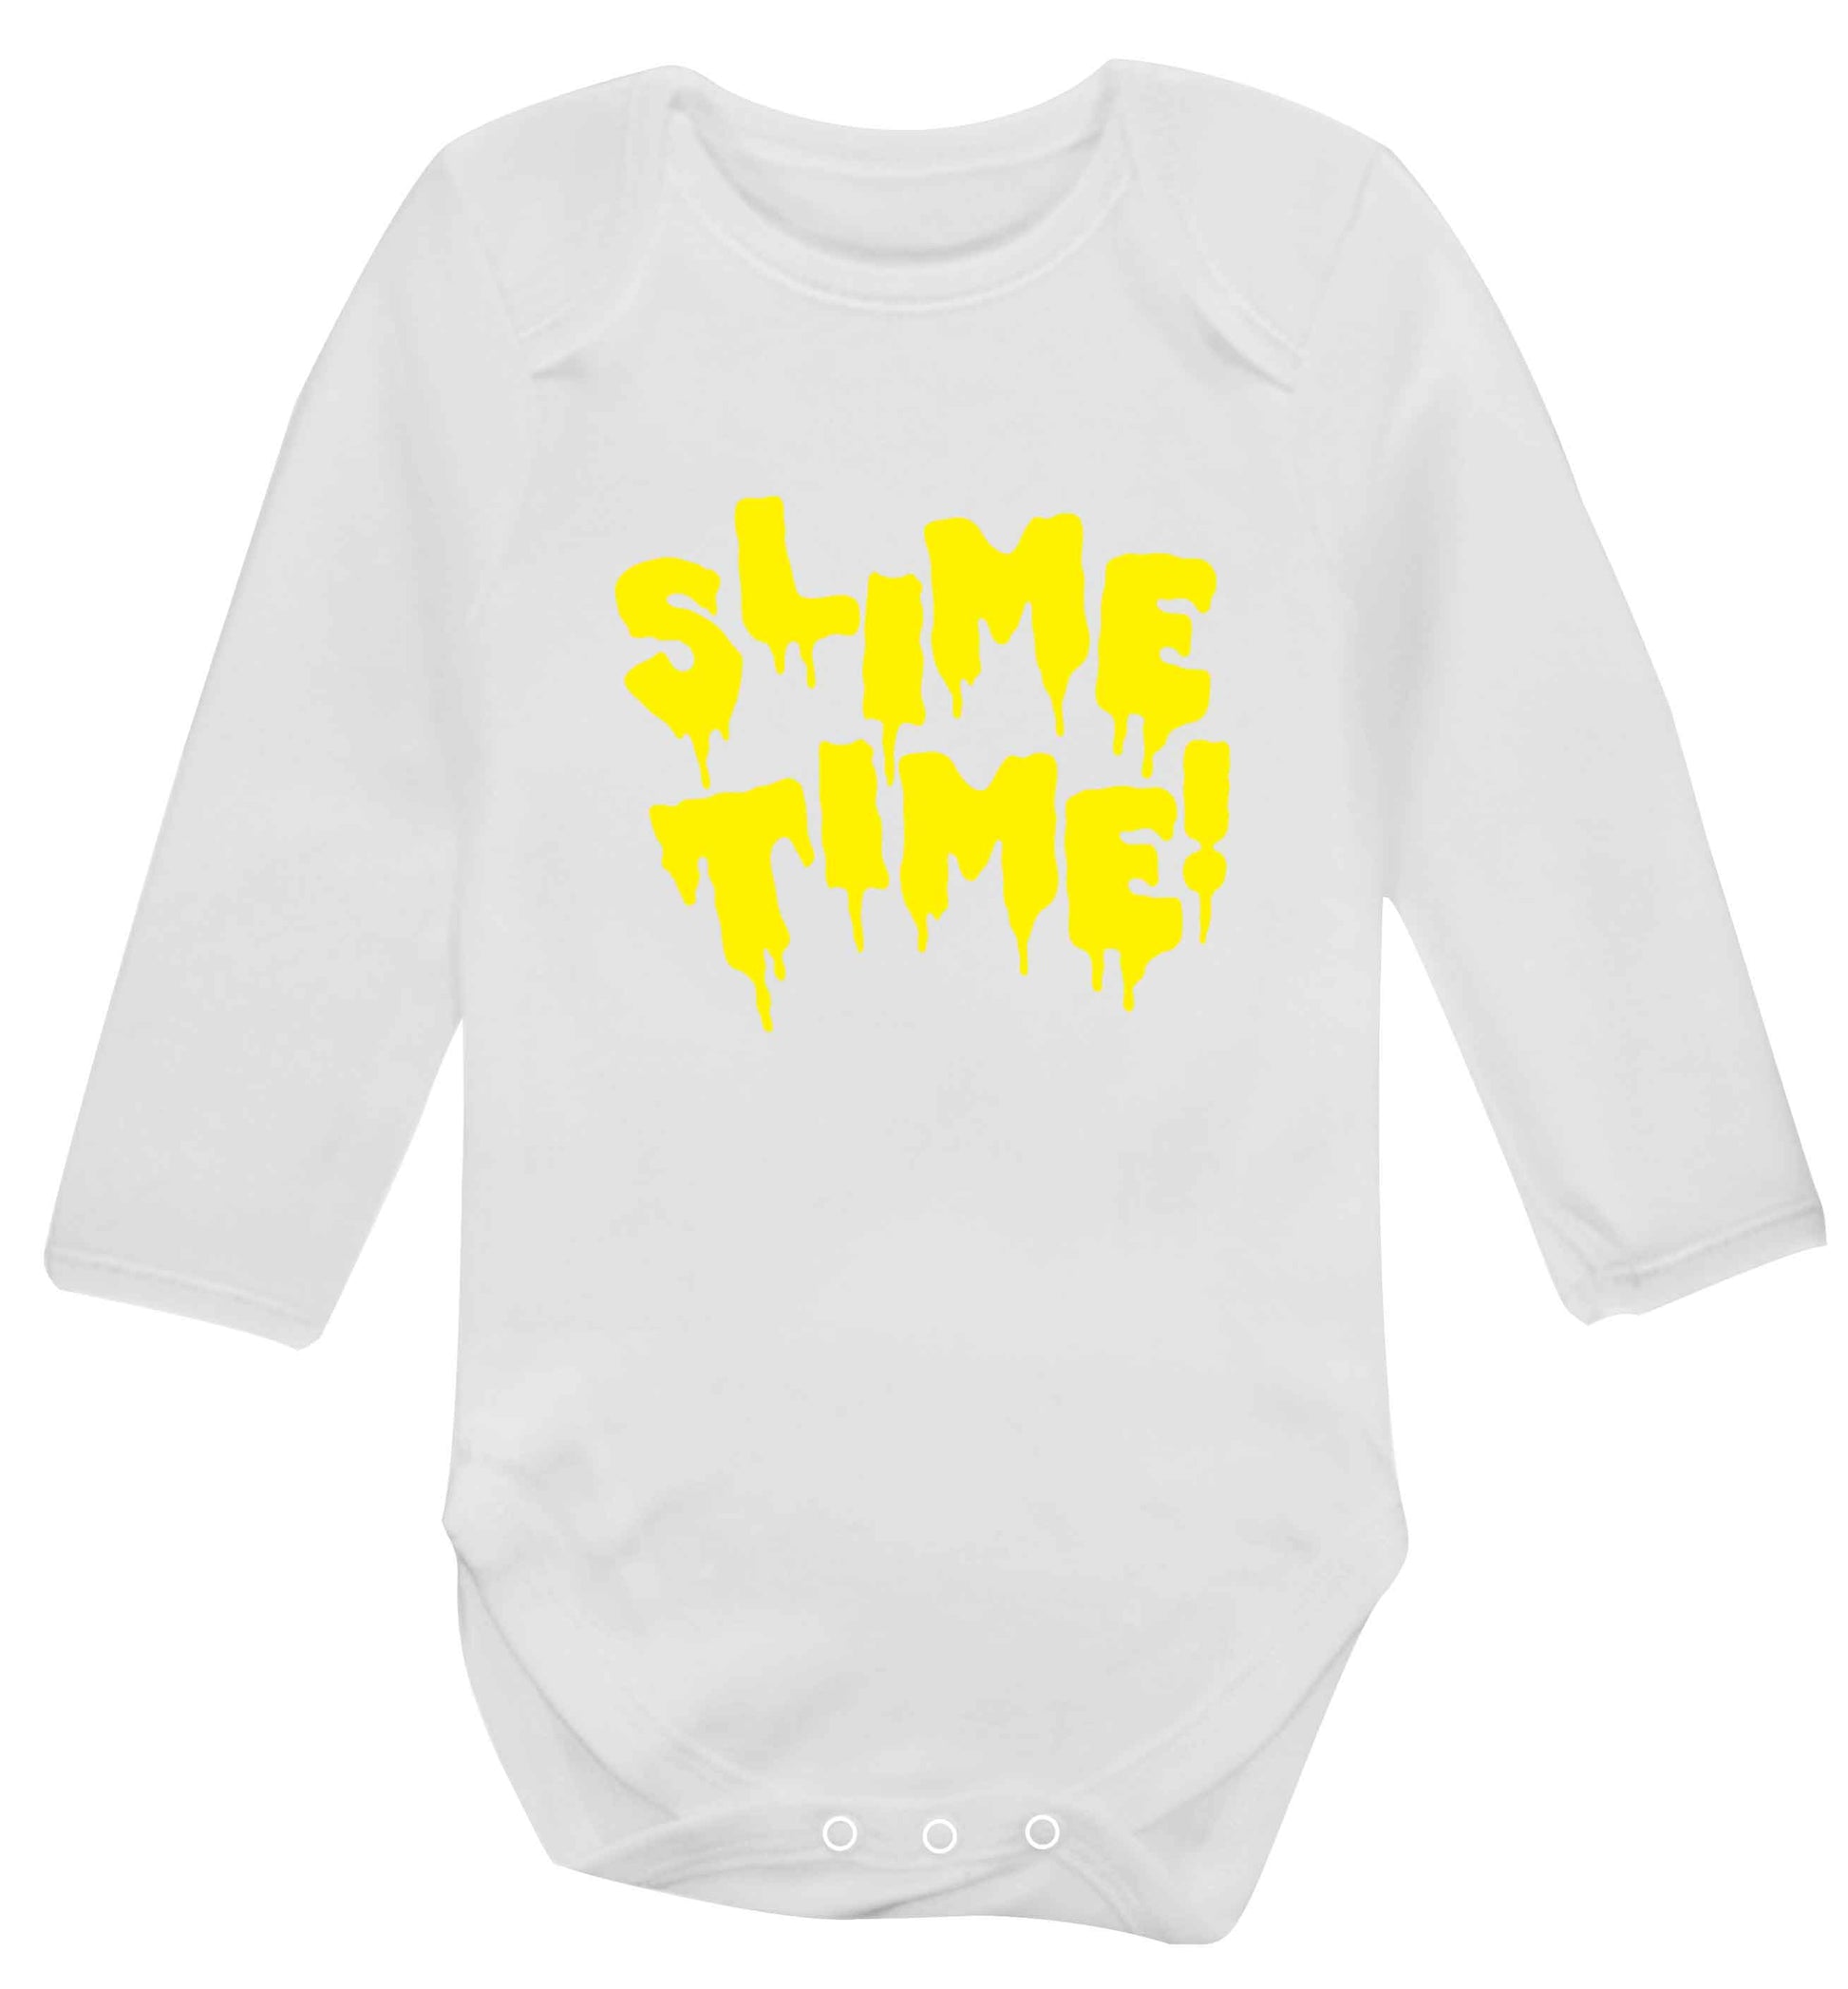 Neon yellow slime time baby vest long sleeved white 6-12 months